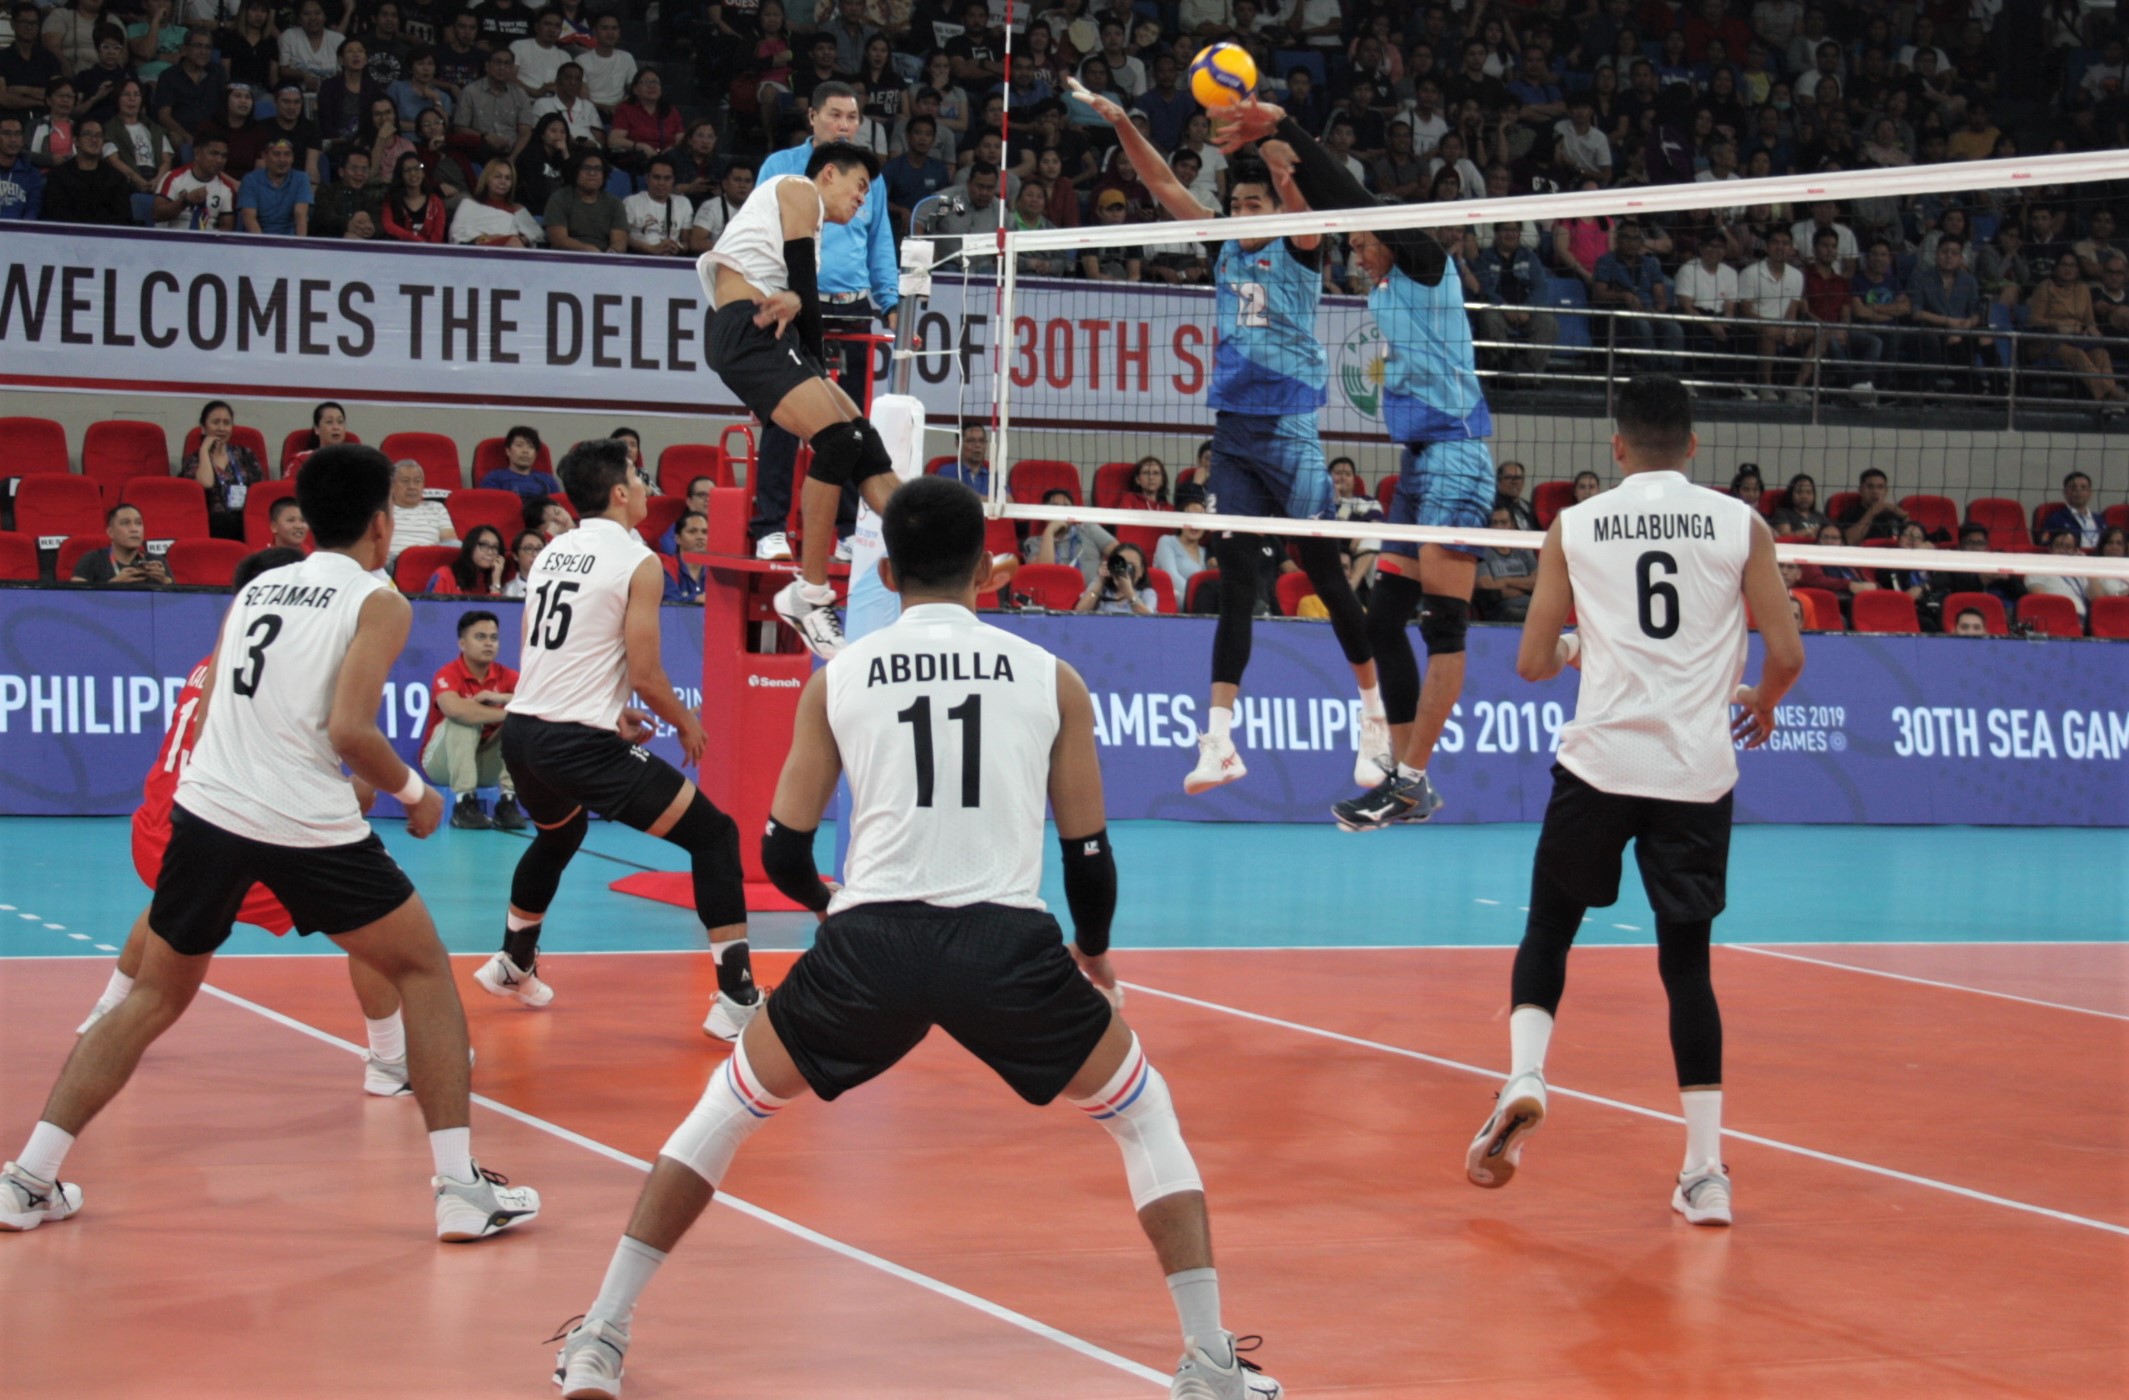 HOSTS PHILIPPINES, THAILAND, INDONESIA AND MYANMAR TO STRUT THEIR STUFF IN 30TH SEA GAMES MEN’S VOLLEYBALL SEMI-FINALS